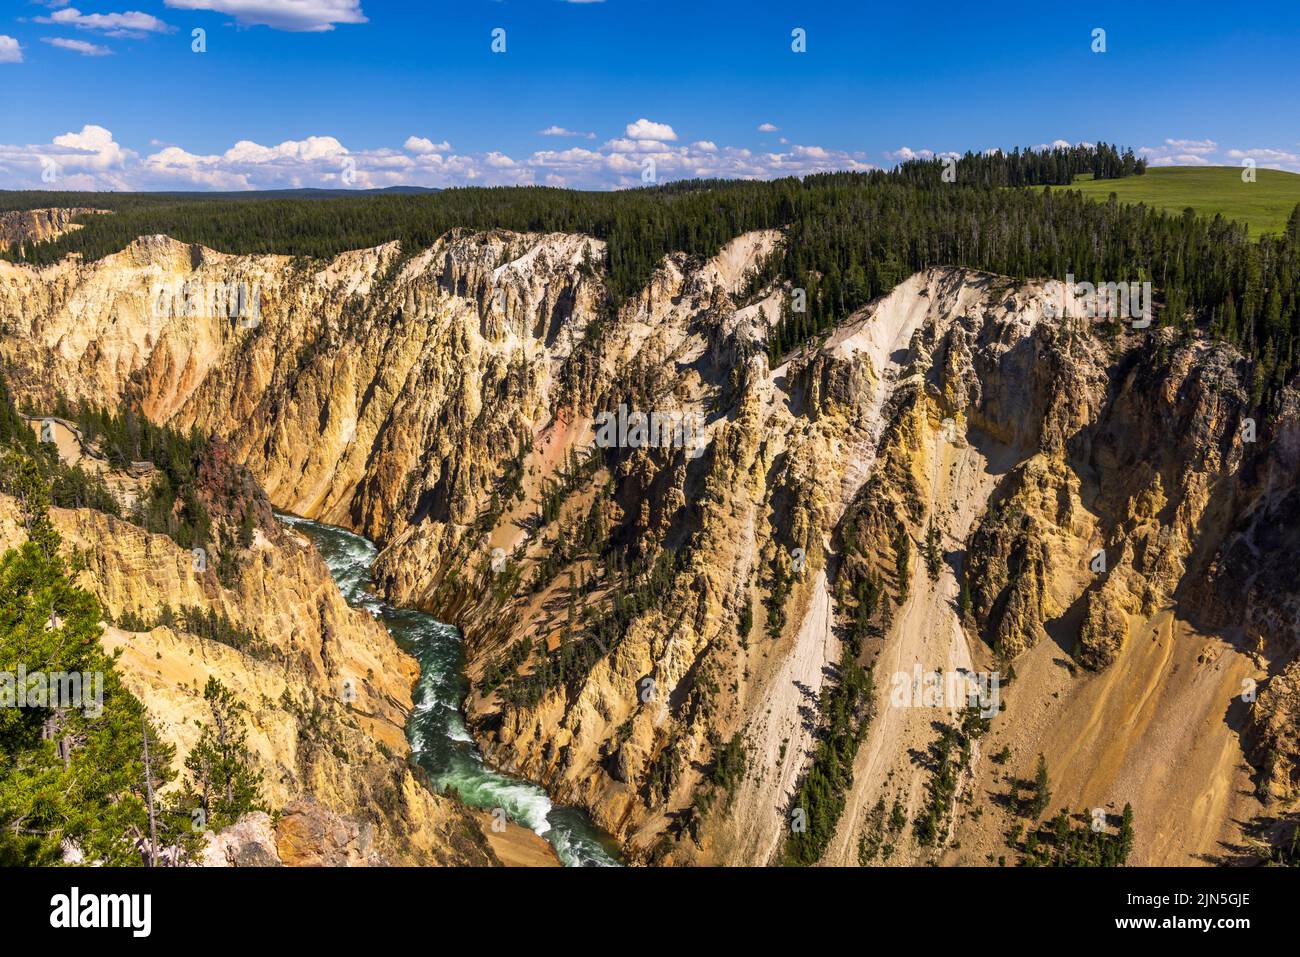 This is a view of the spectacular Grand Canyon of the Yellowstone with the Yellowstone River visible at the bottom in Yellowstone National Park, USA. Stock Photo